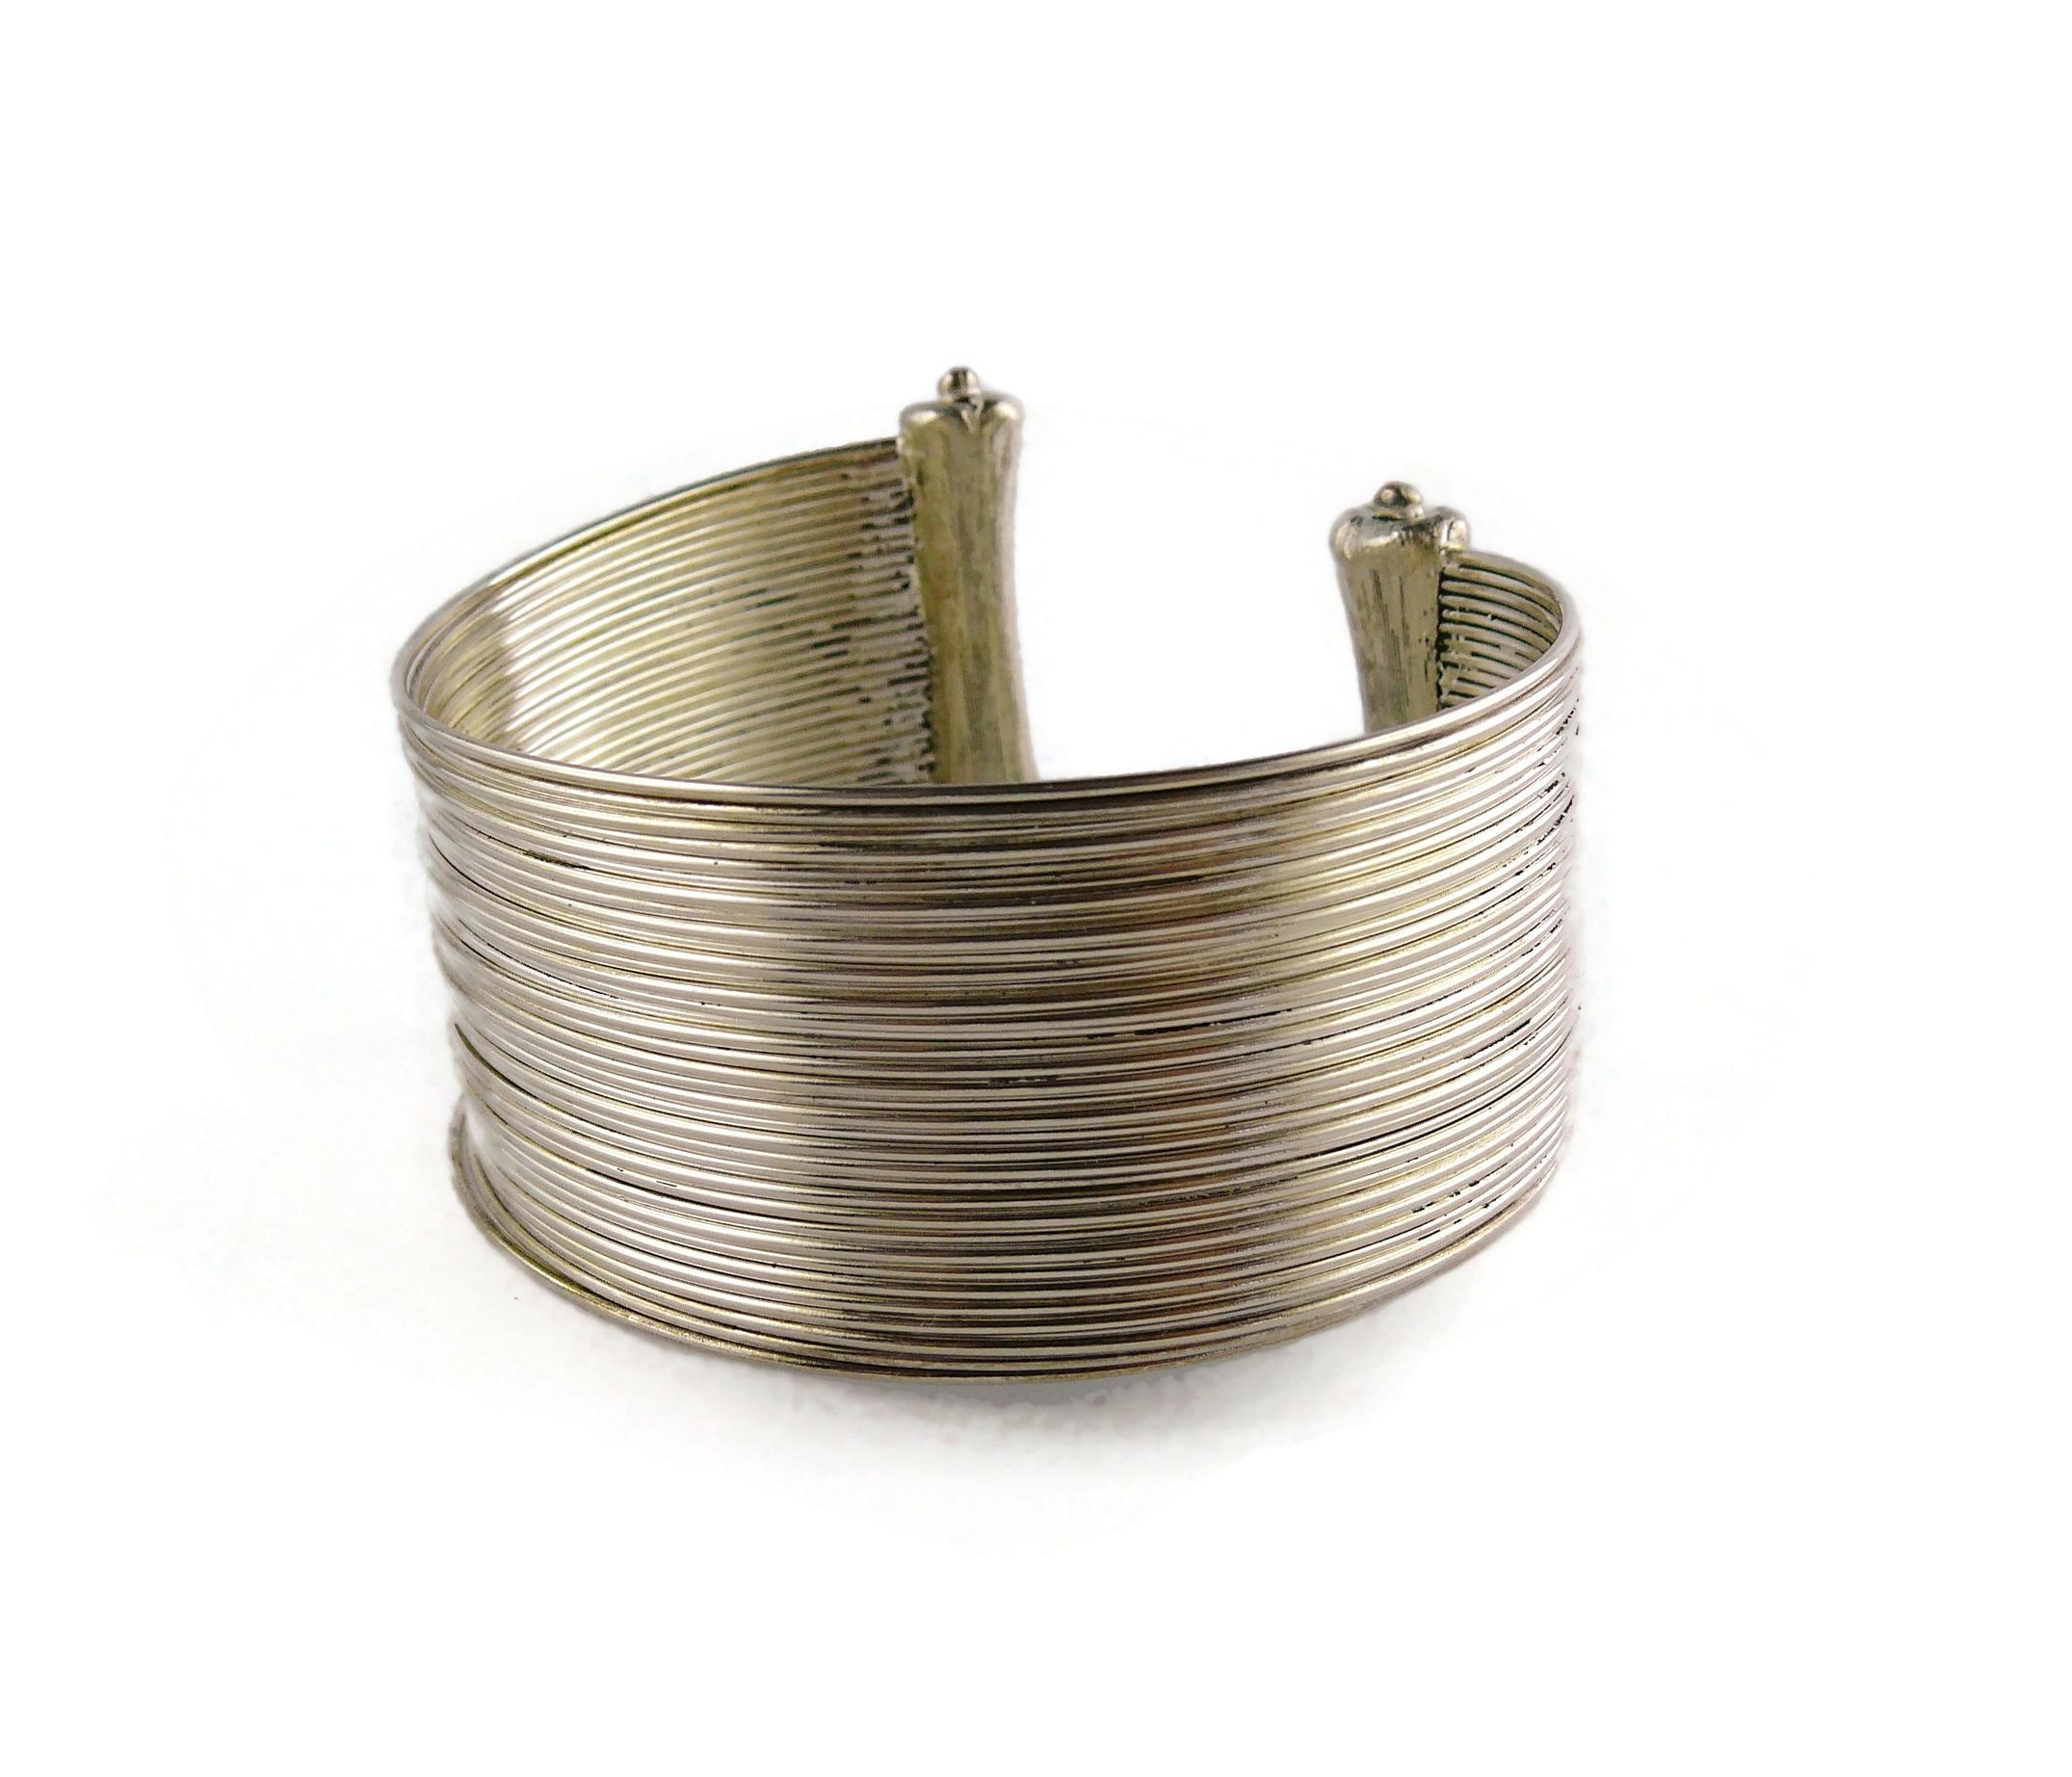 Christian Dior Boutique Vintage Silver Toned Wire Cuff Bracelet In Fair Condition For Sale In Nice, FR